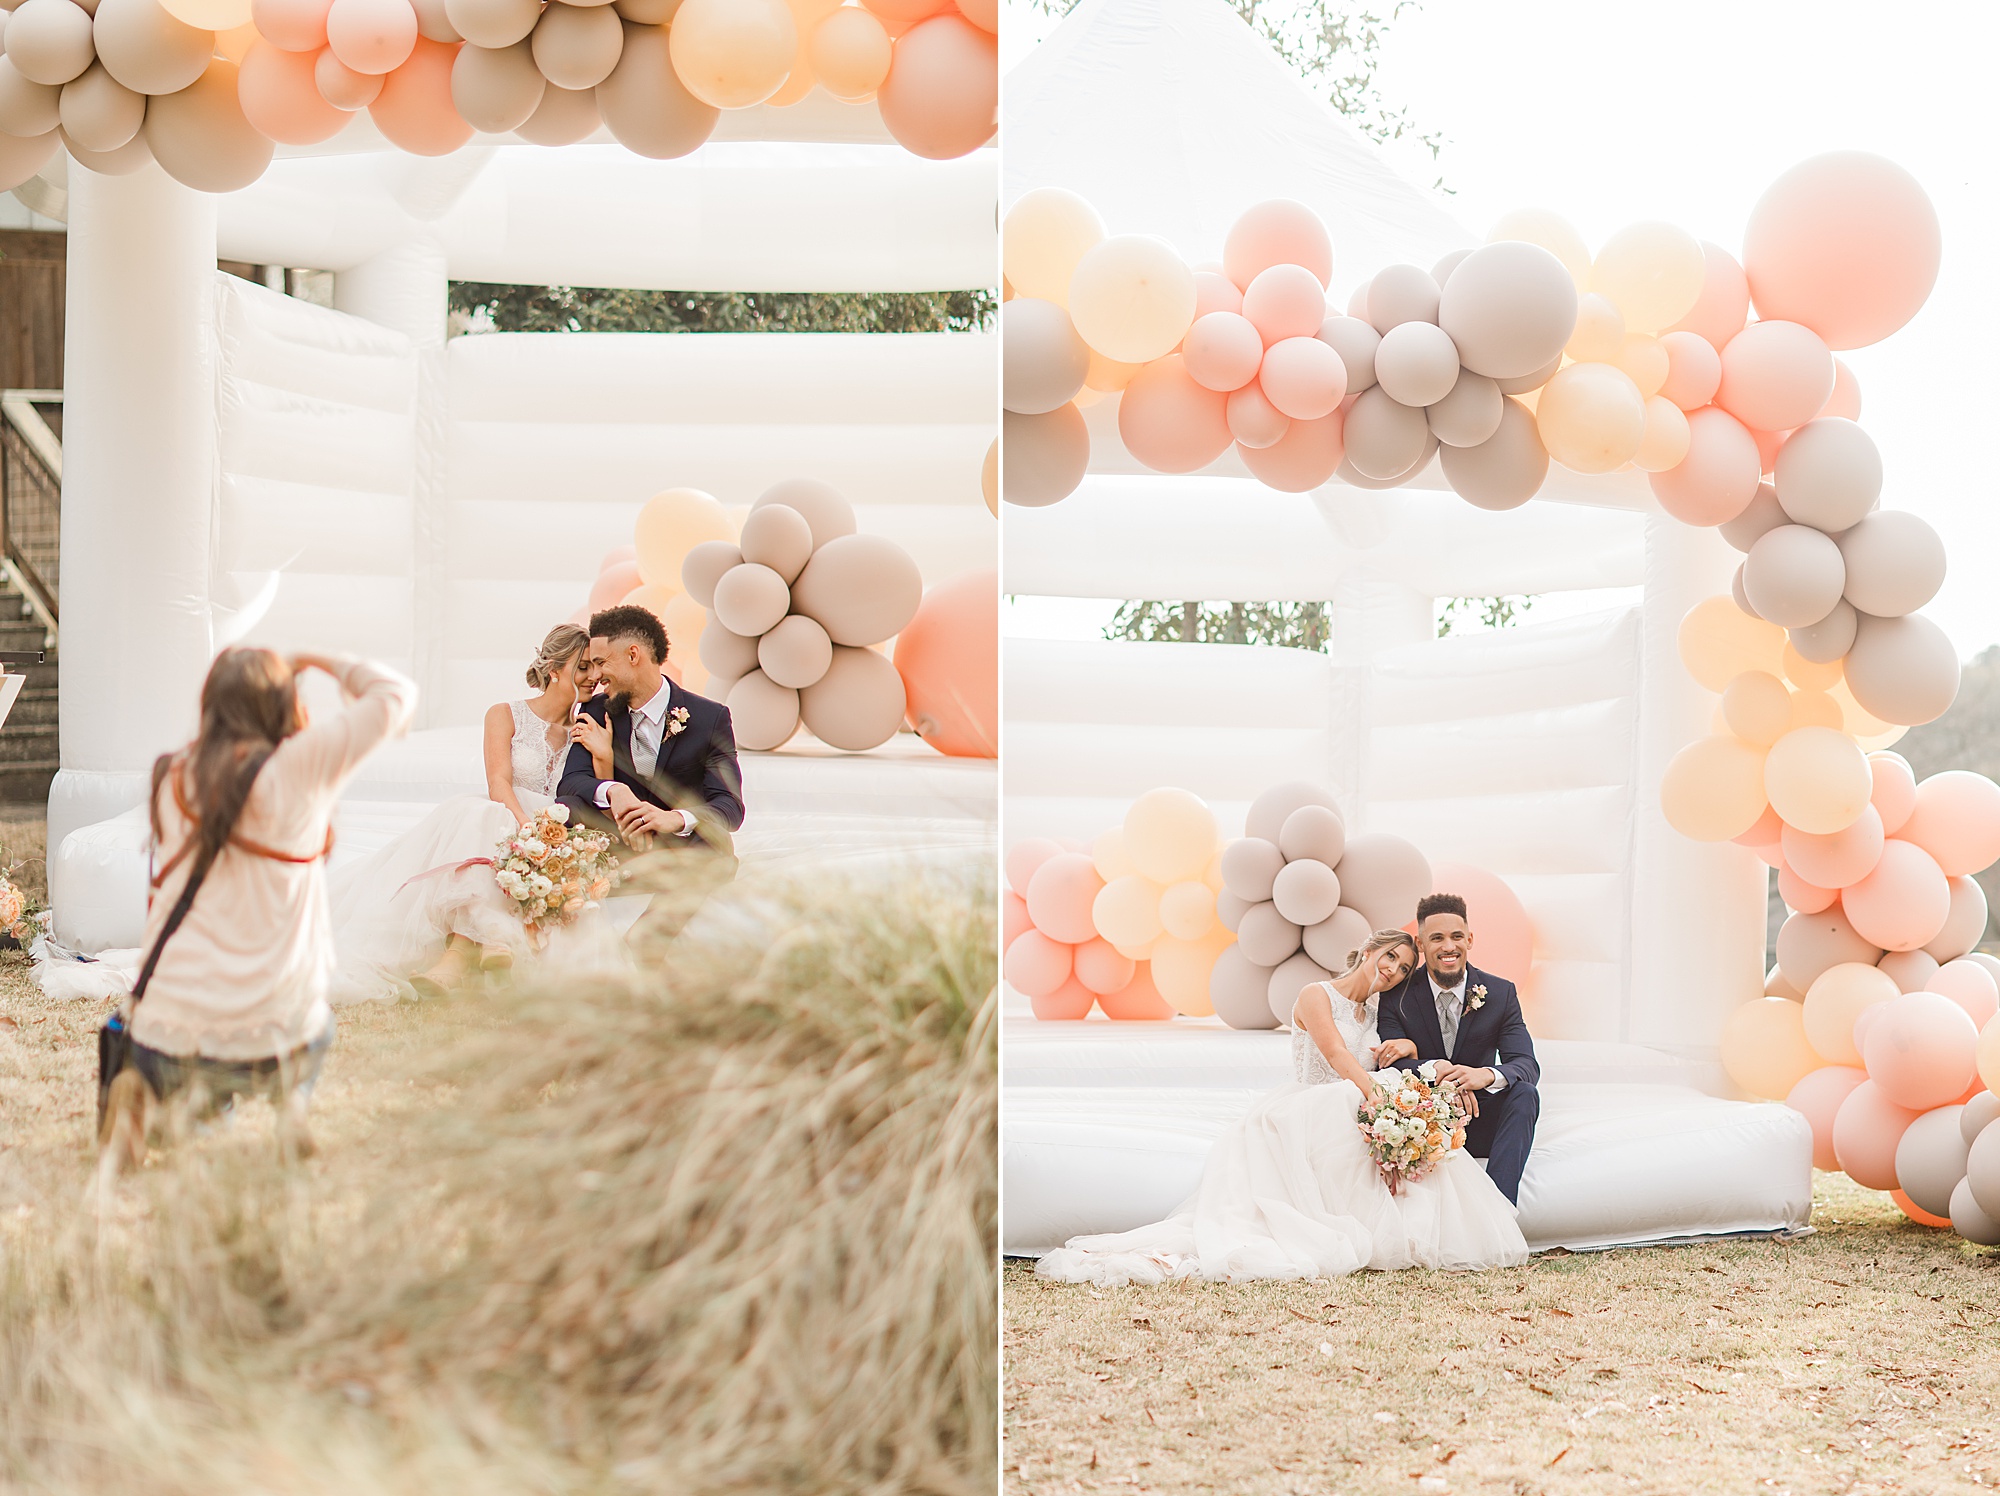 bride and groom pose by balloon display from Posh Balloons